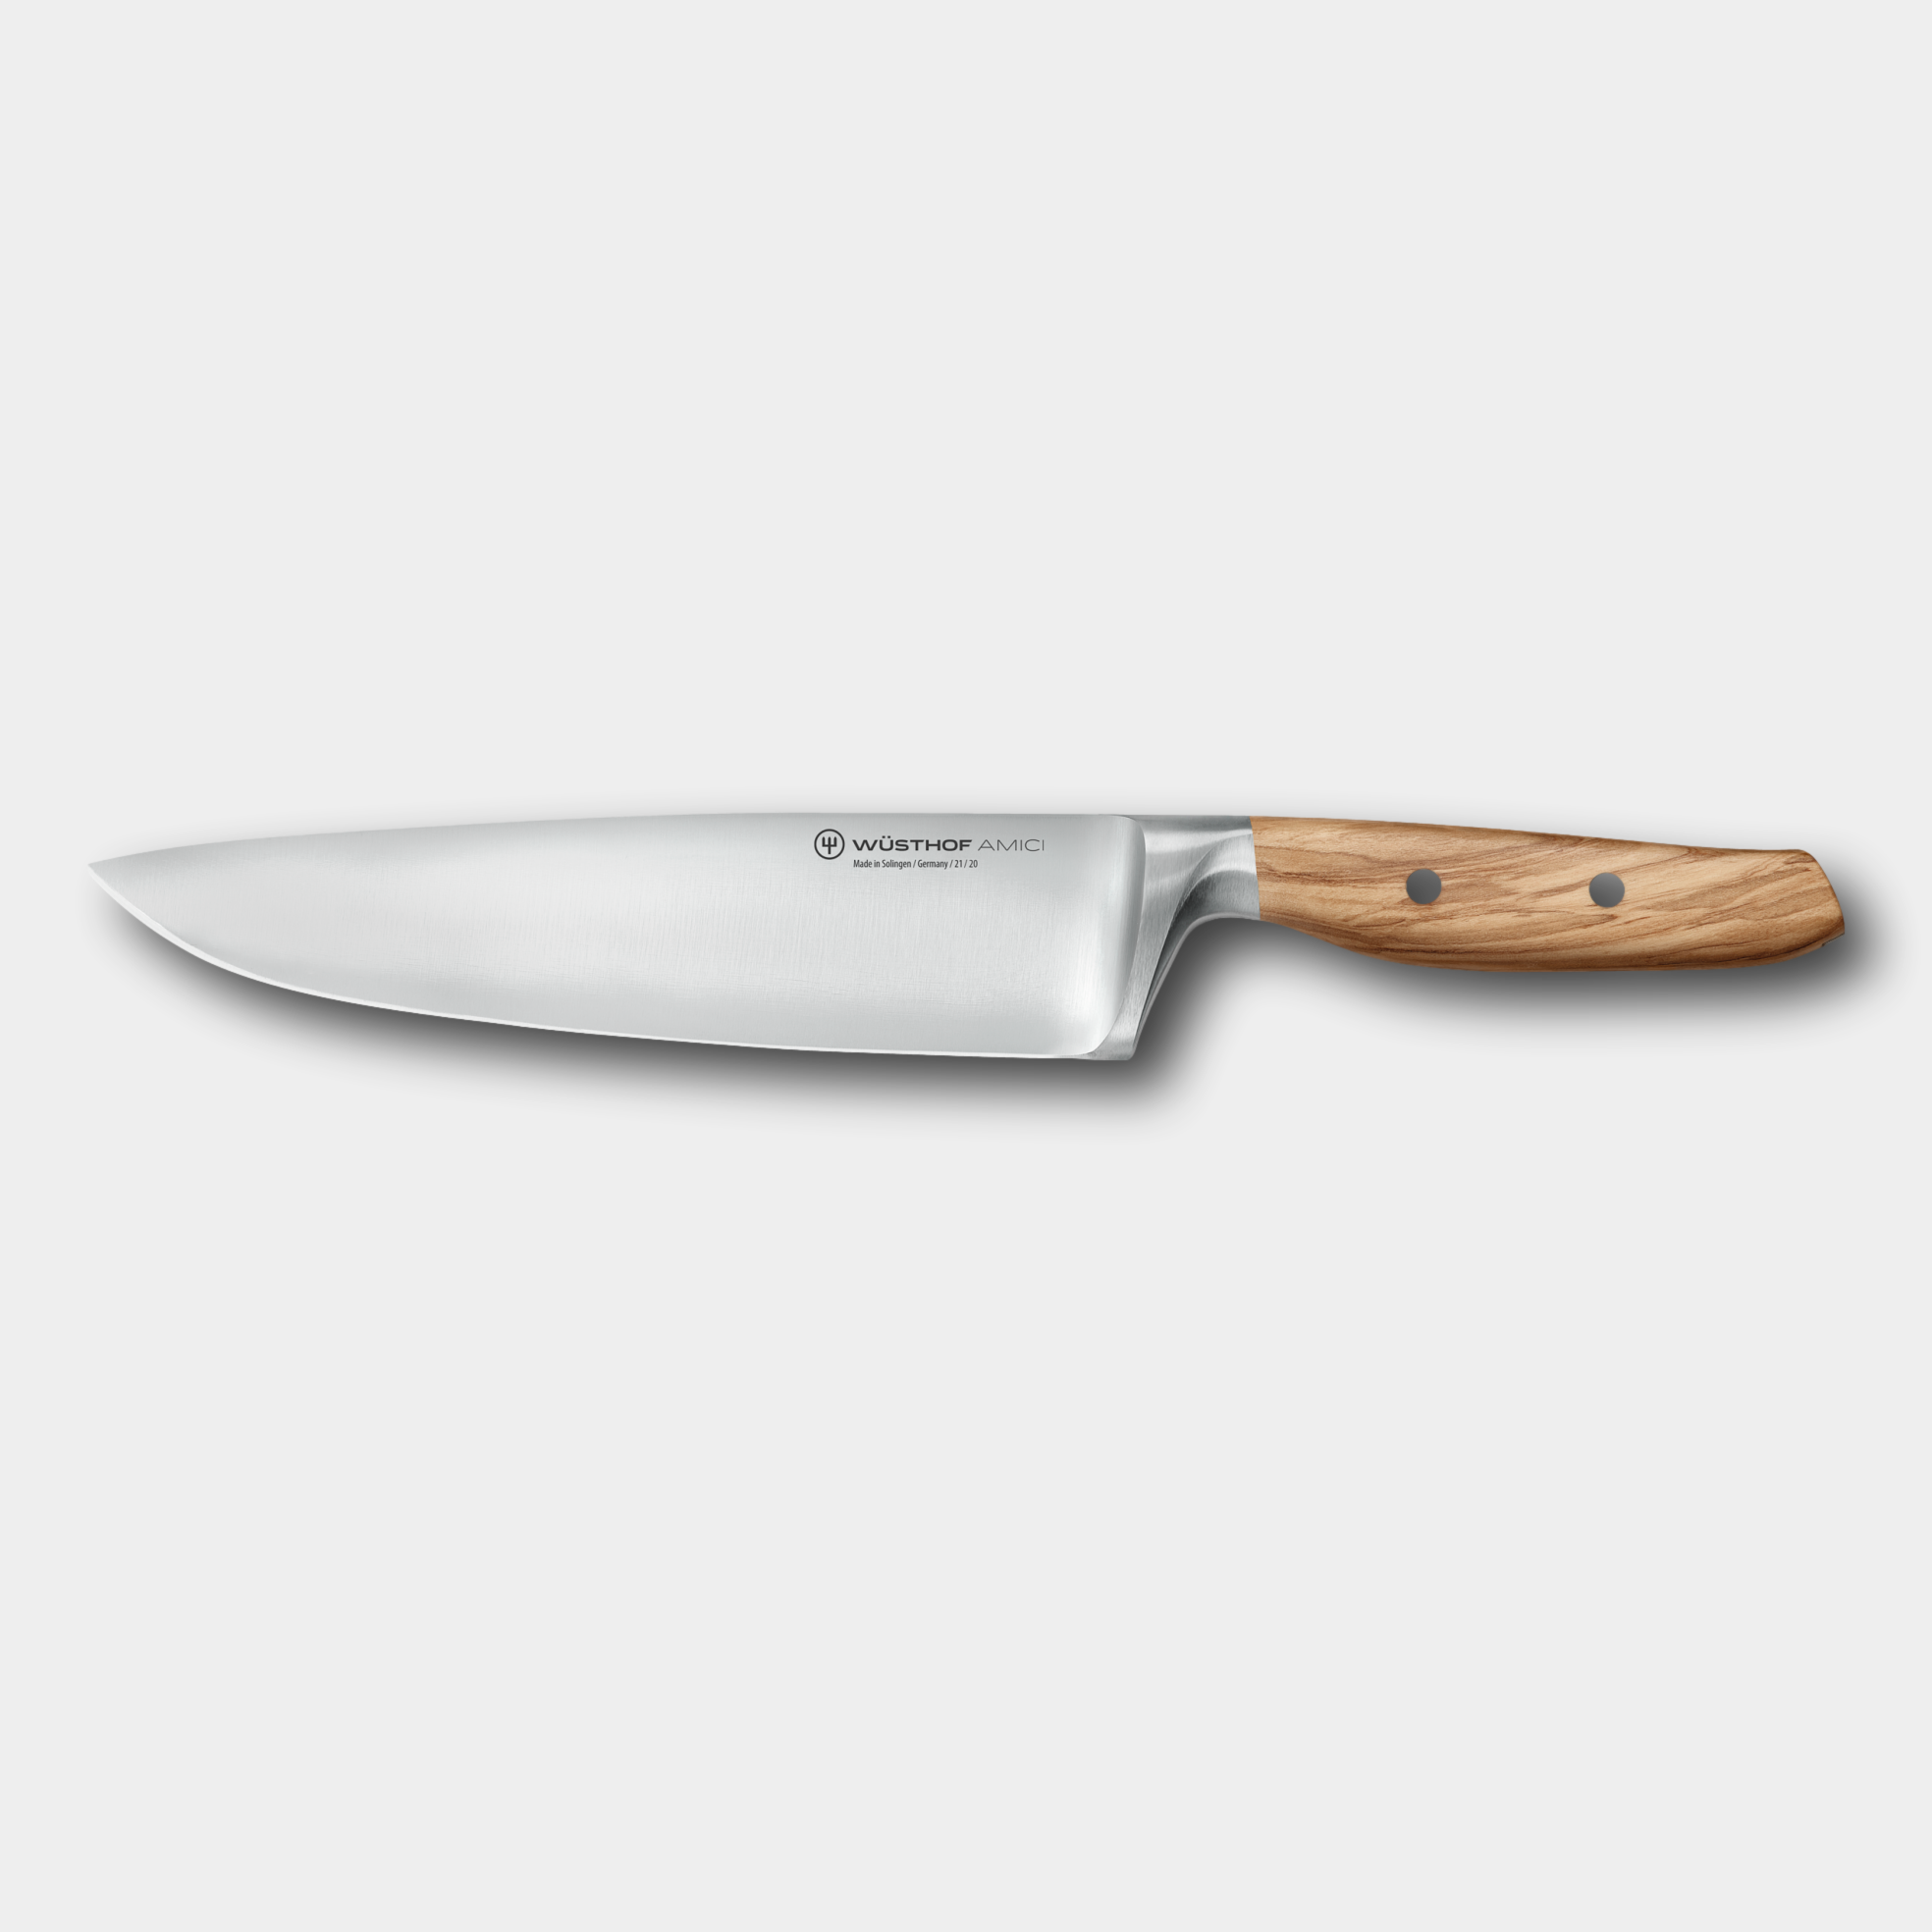 Wusthof Amici 20cm Cook's Knife